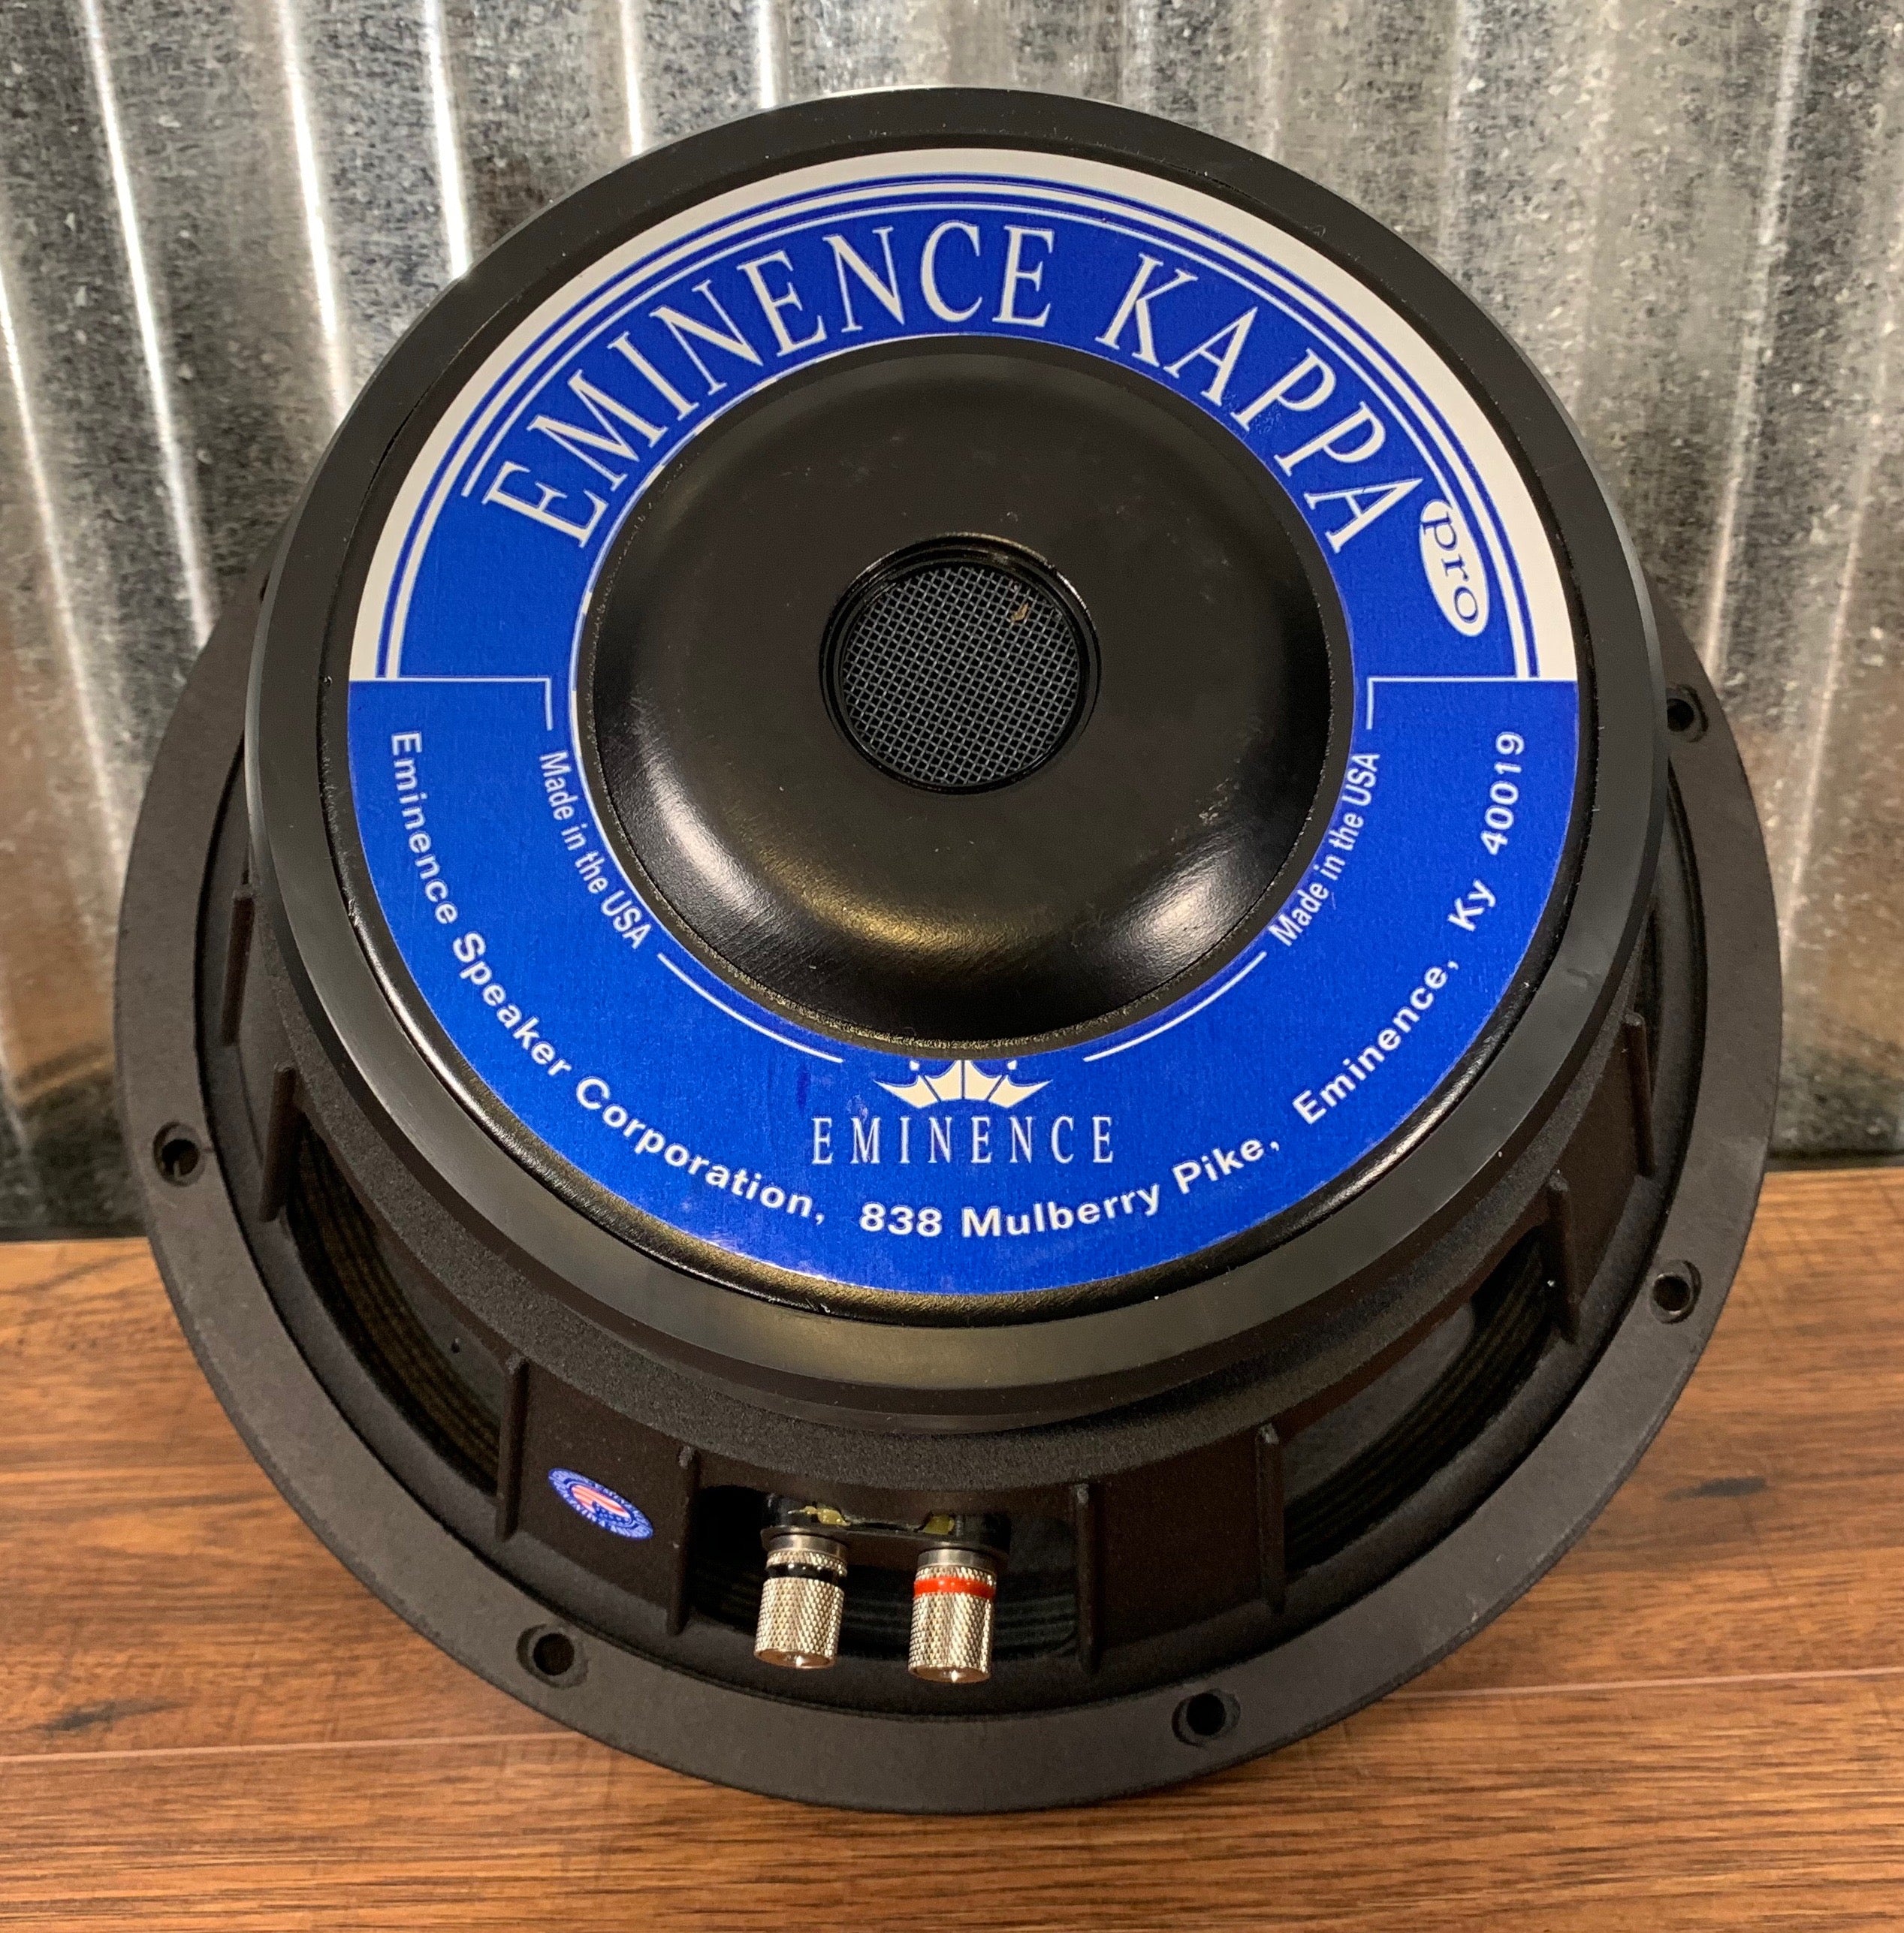 Eminence Kappa 12A 12" Cast Frame Replacement Speaker 8 ohm Made Specialty